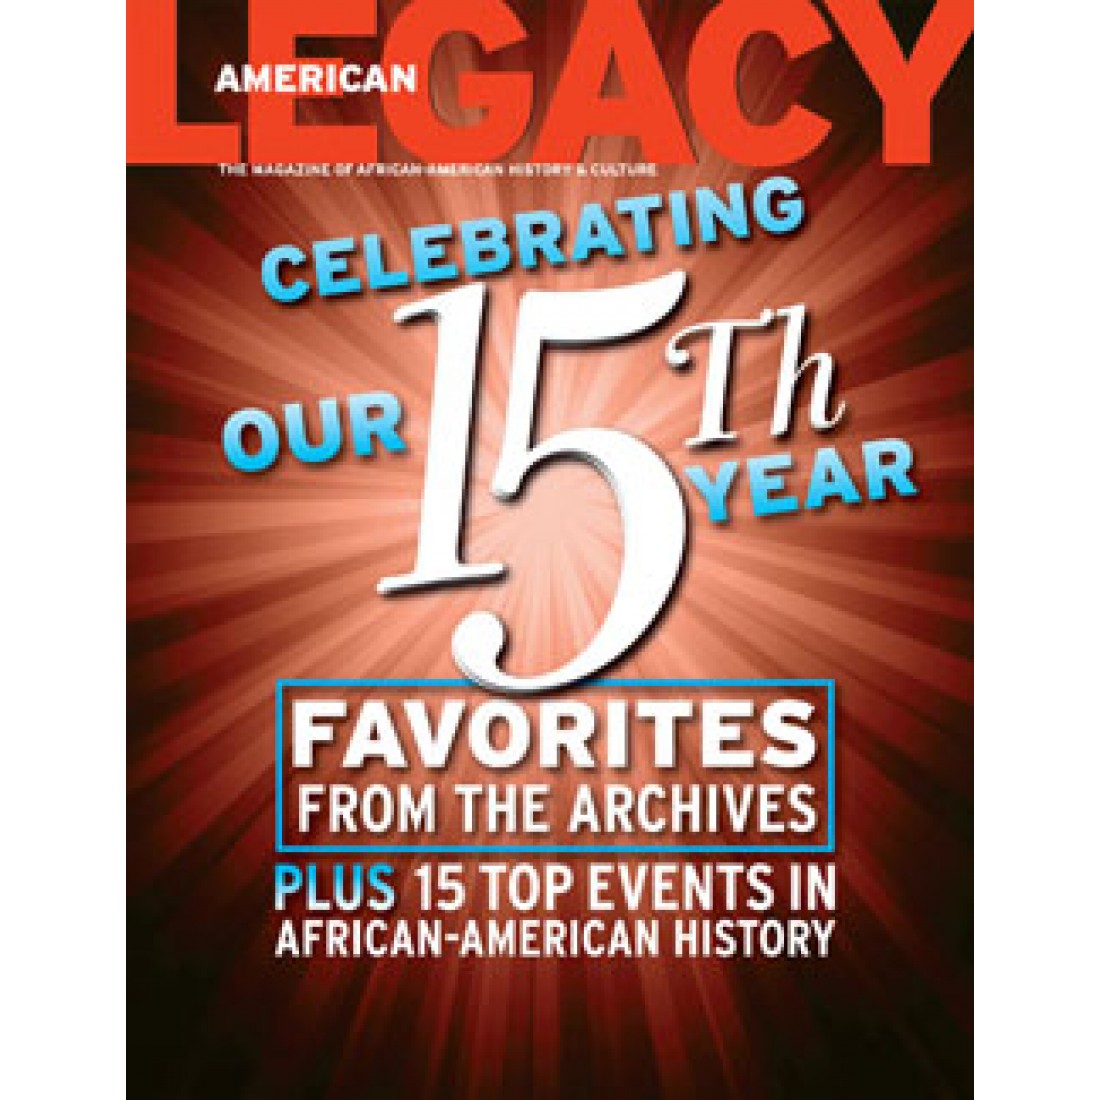 American Legacy Magazine Subscriber Services